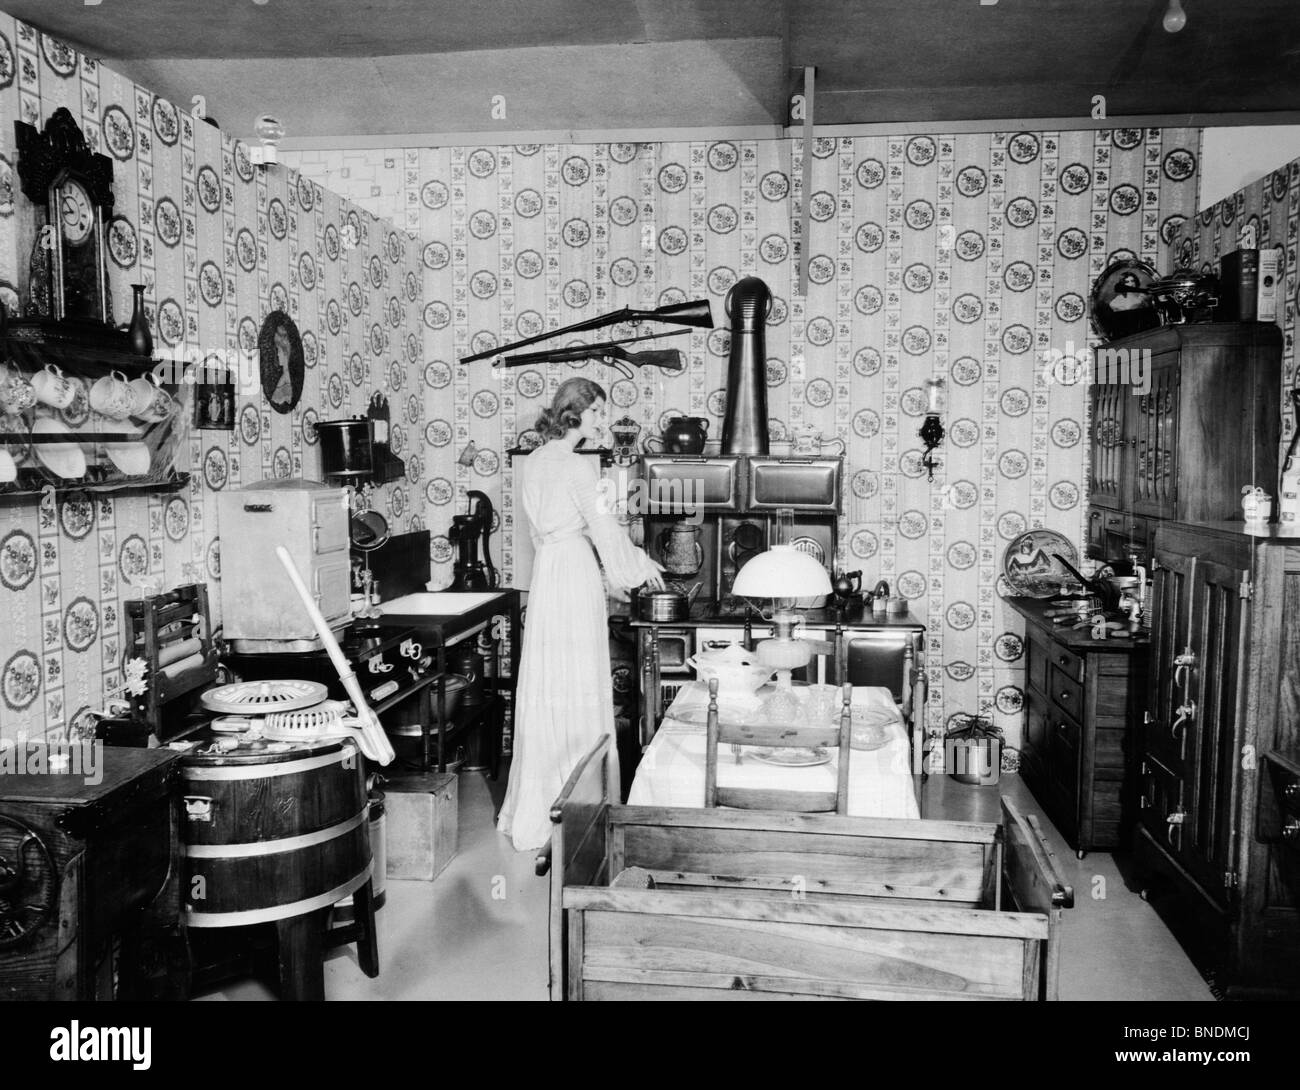 Rear view of a young woman preparing food in a kitchen, Pioneer Village, Minden, Nebraska, USA Stock Photo